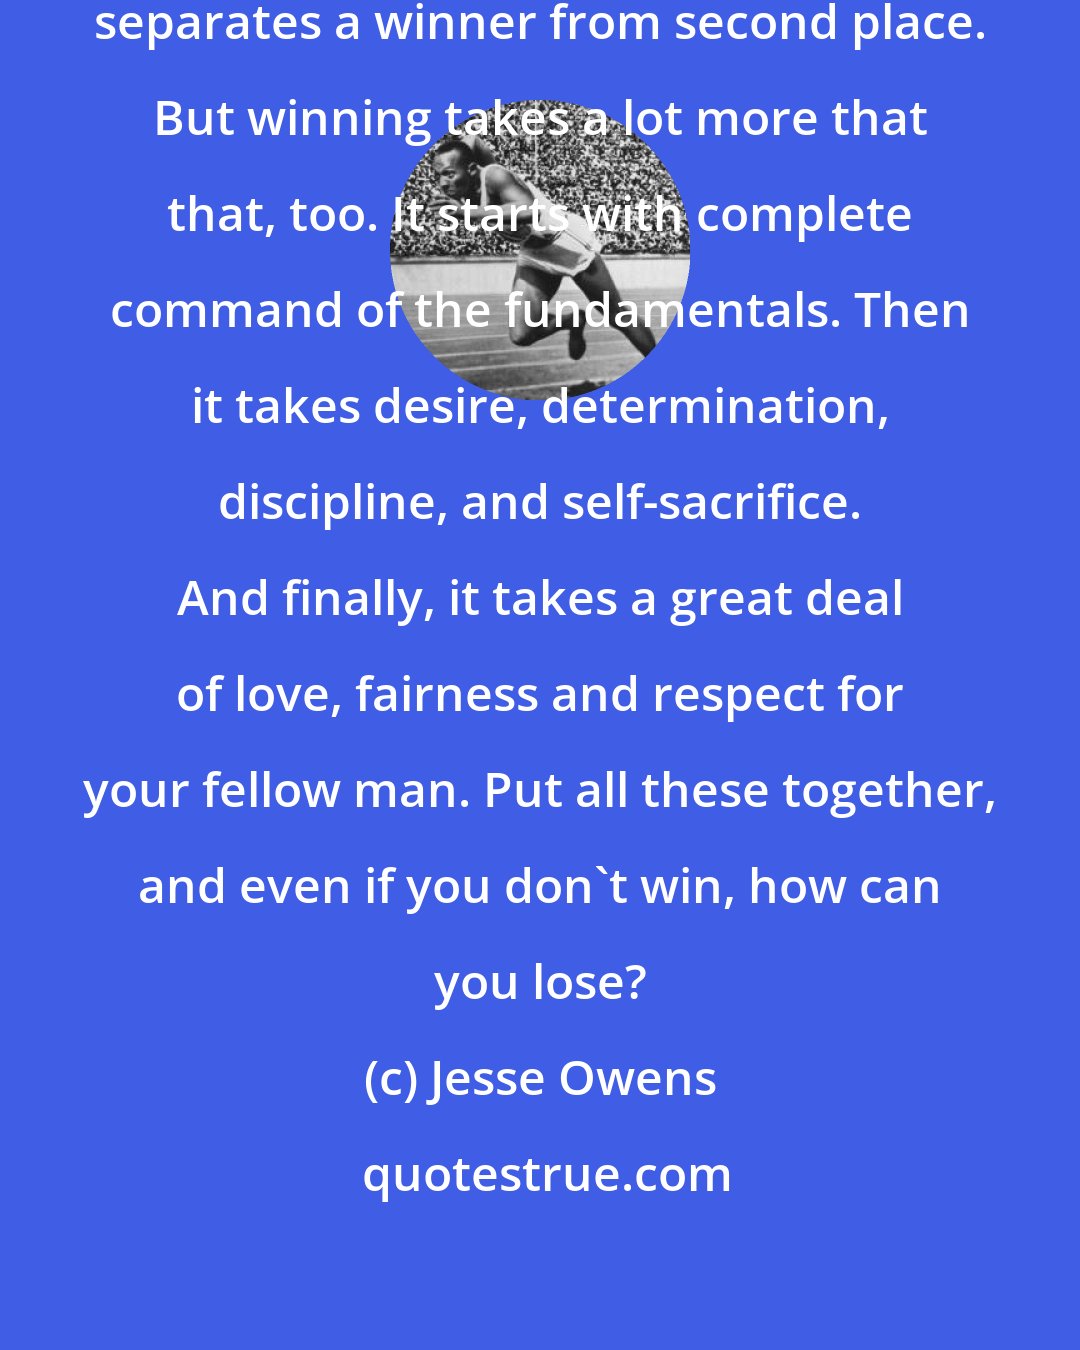 Jesse Owens: In the end, it's extra effort that separates a winner from second place. But winning takes a lot more that that, too. It starts with complete command of the fundamentals. Then it takes desire, determination, discipline, and self-sacrifice. And finally, it takes a great deal of love, fairness and respect for your fellow man. Put all these together, and even if you don't win, how can you lose?